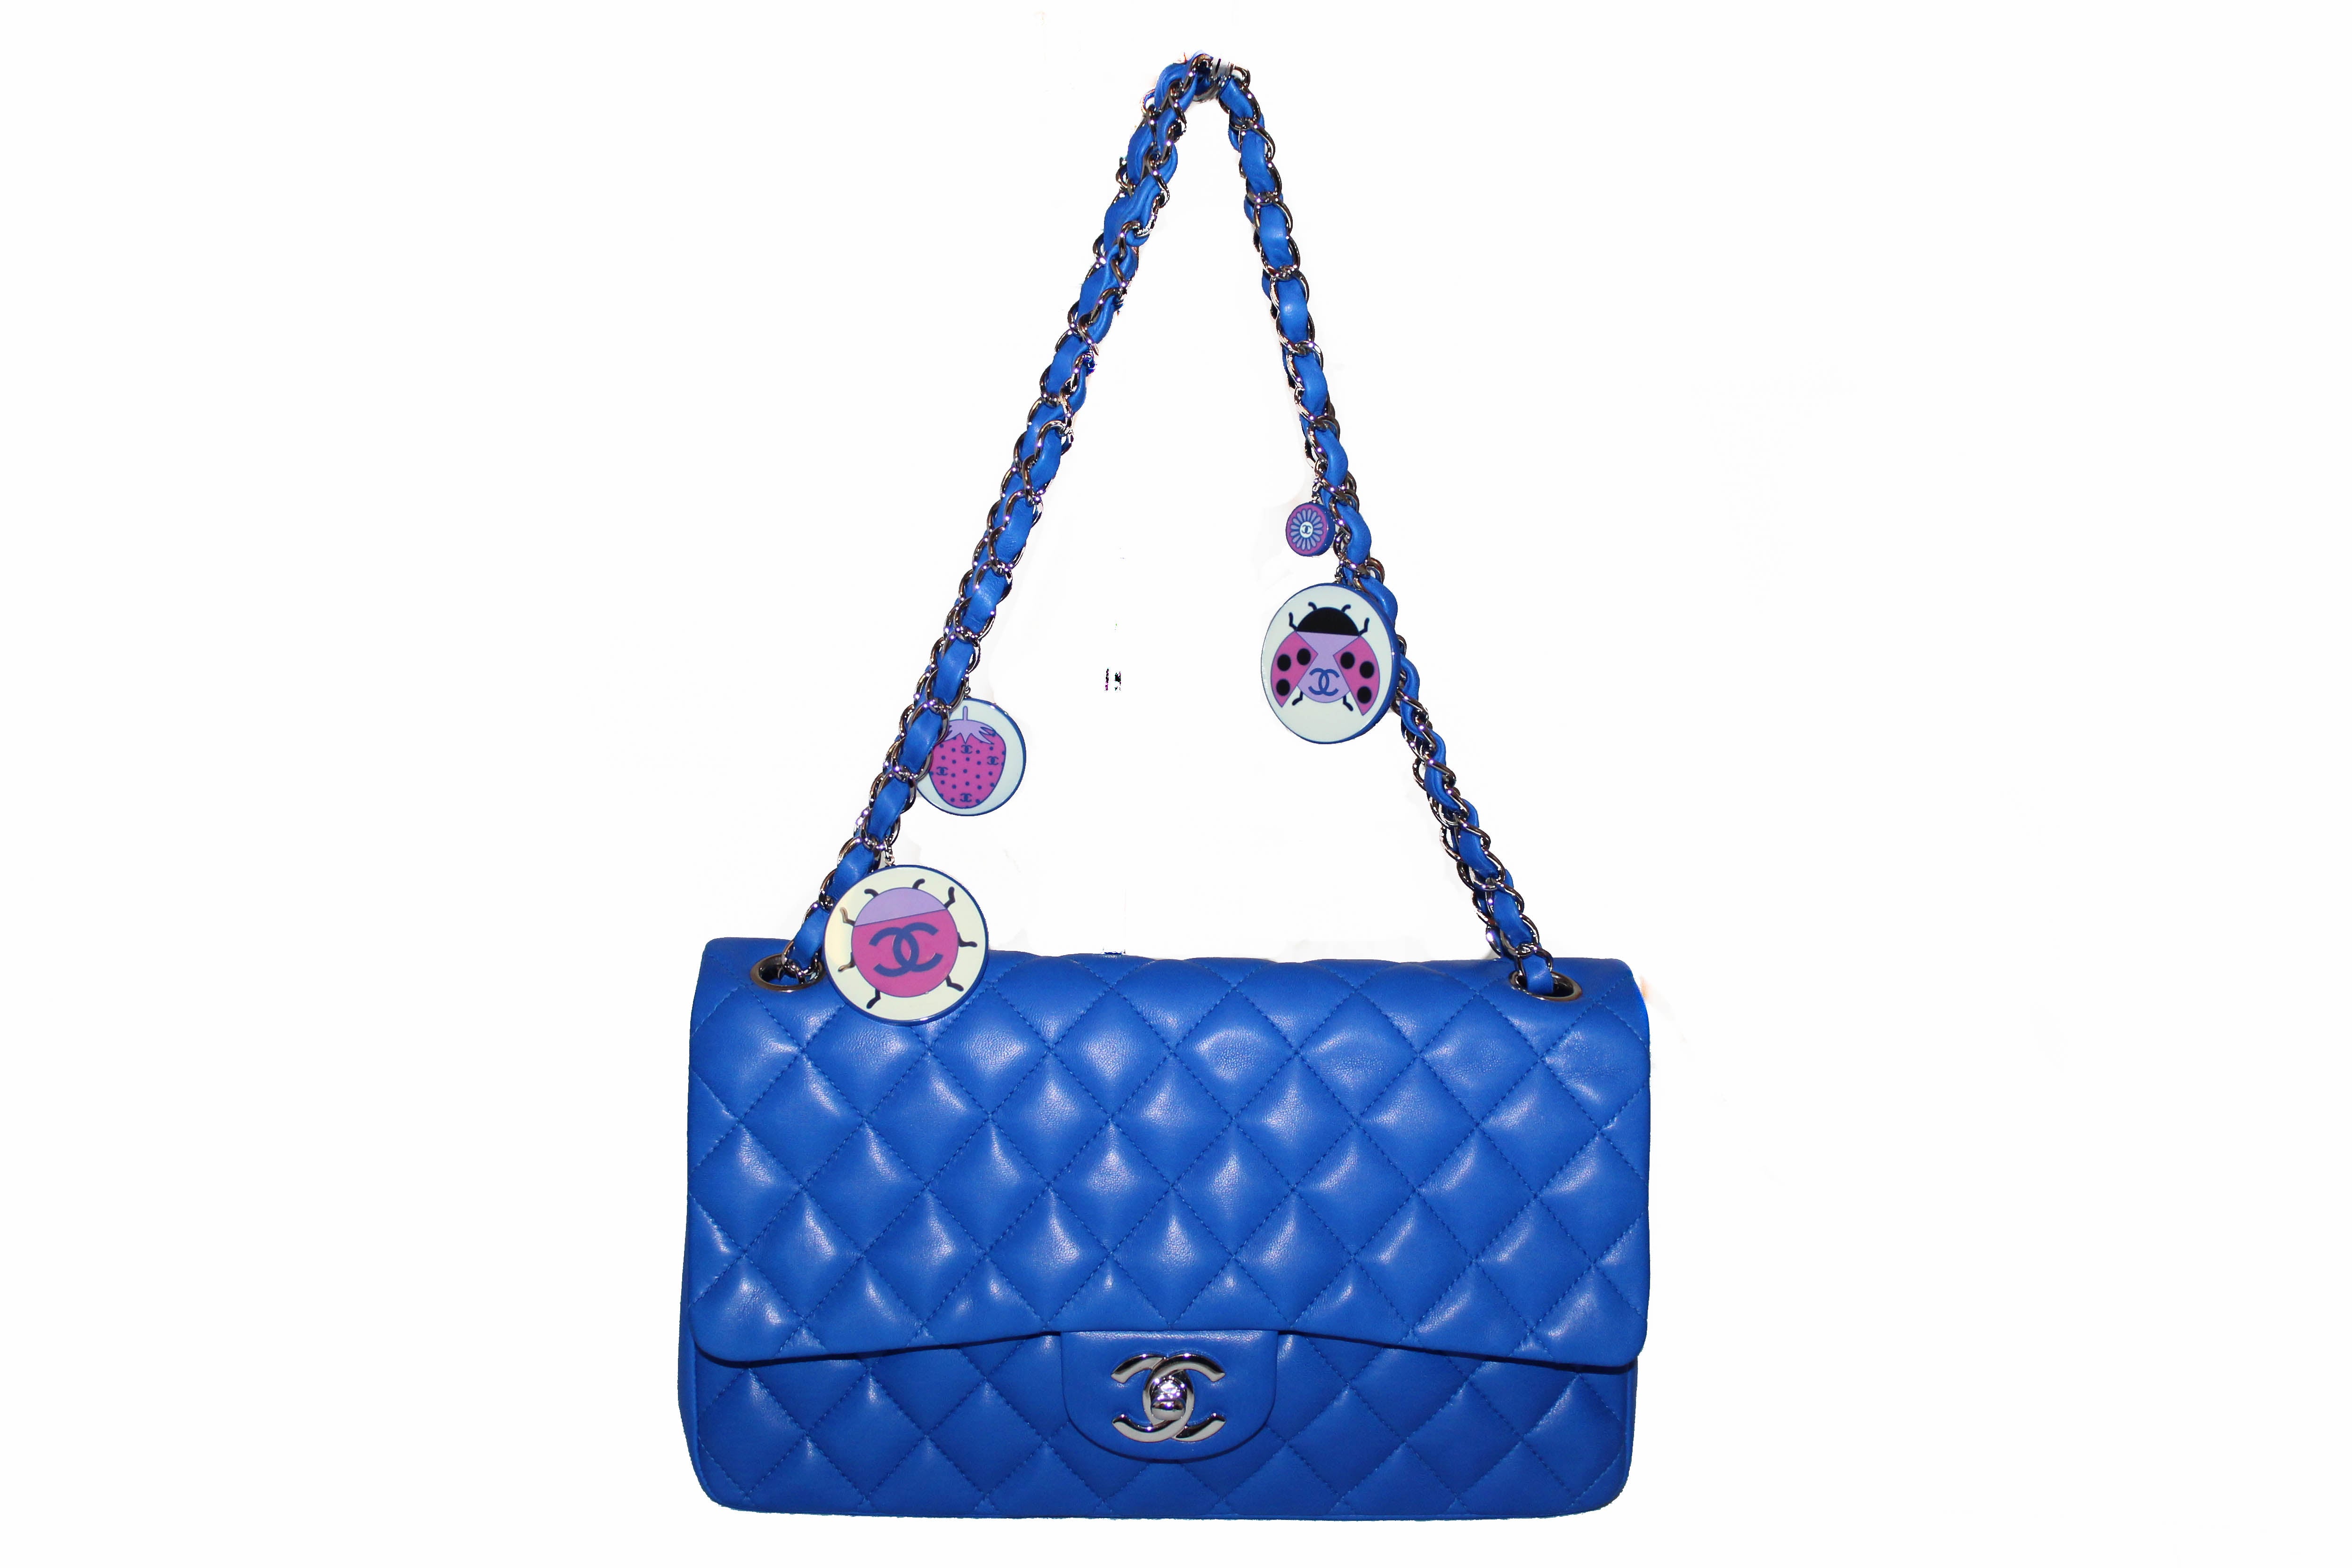 Authentic New Chanel Electric Blue Lambskin Quilted Leather Charrm Medium Classic Shoulder Bag